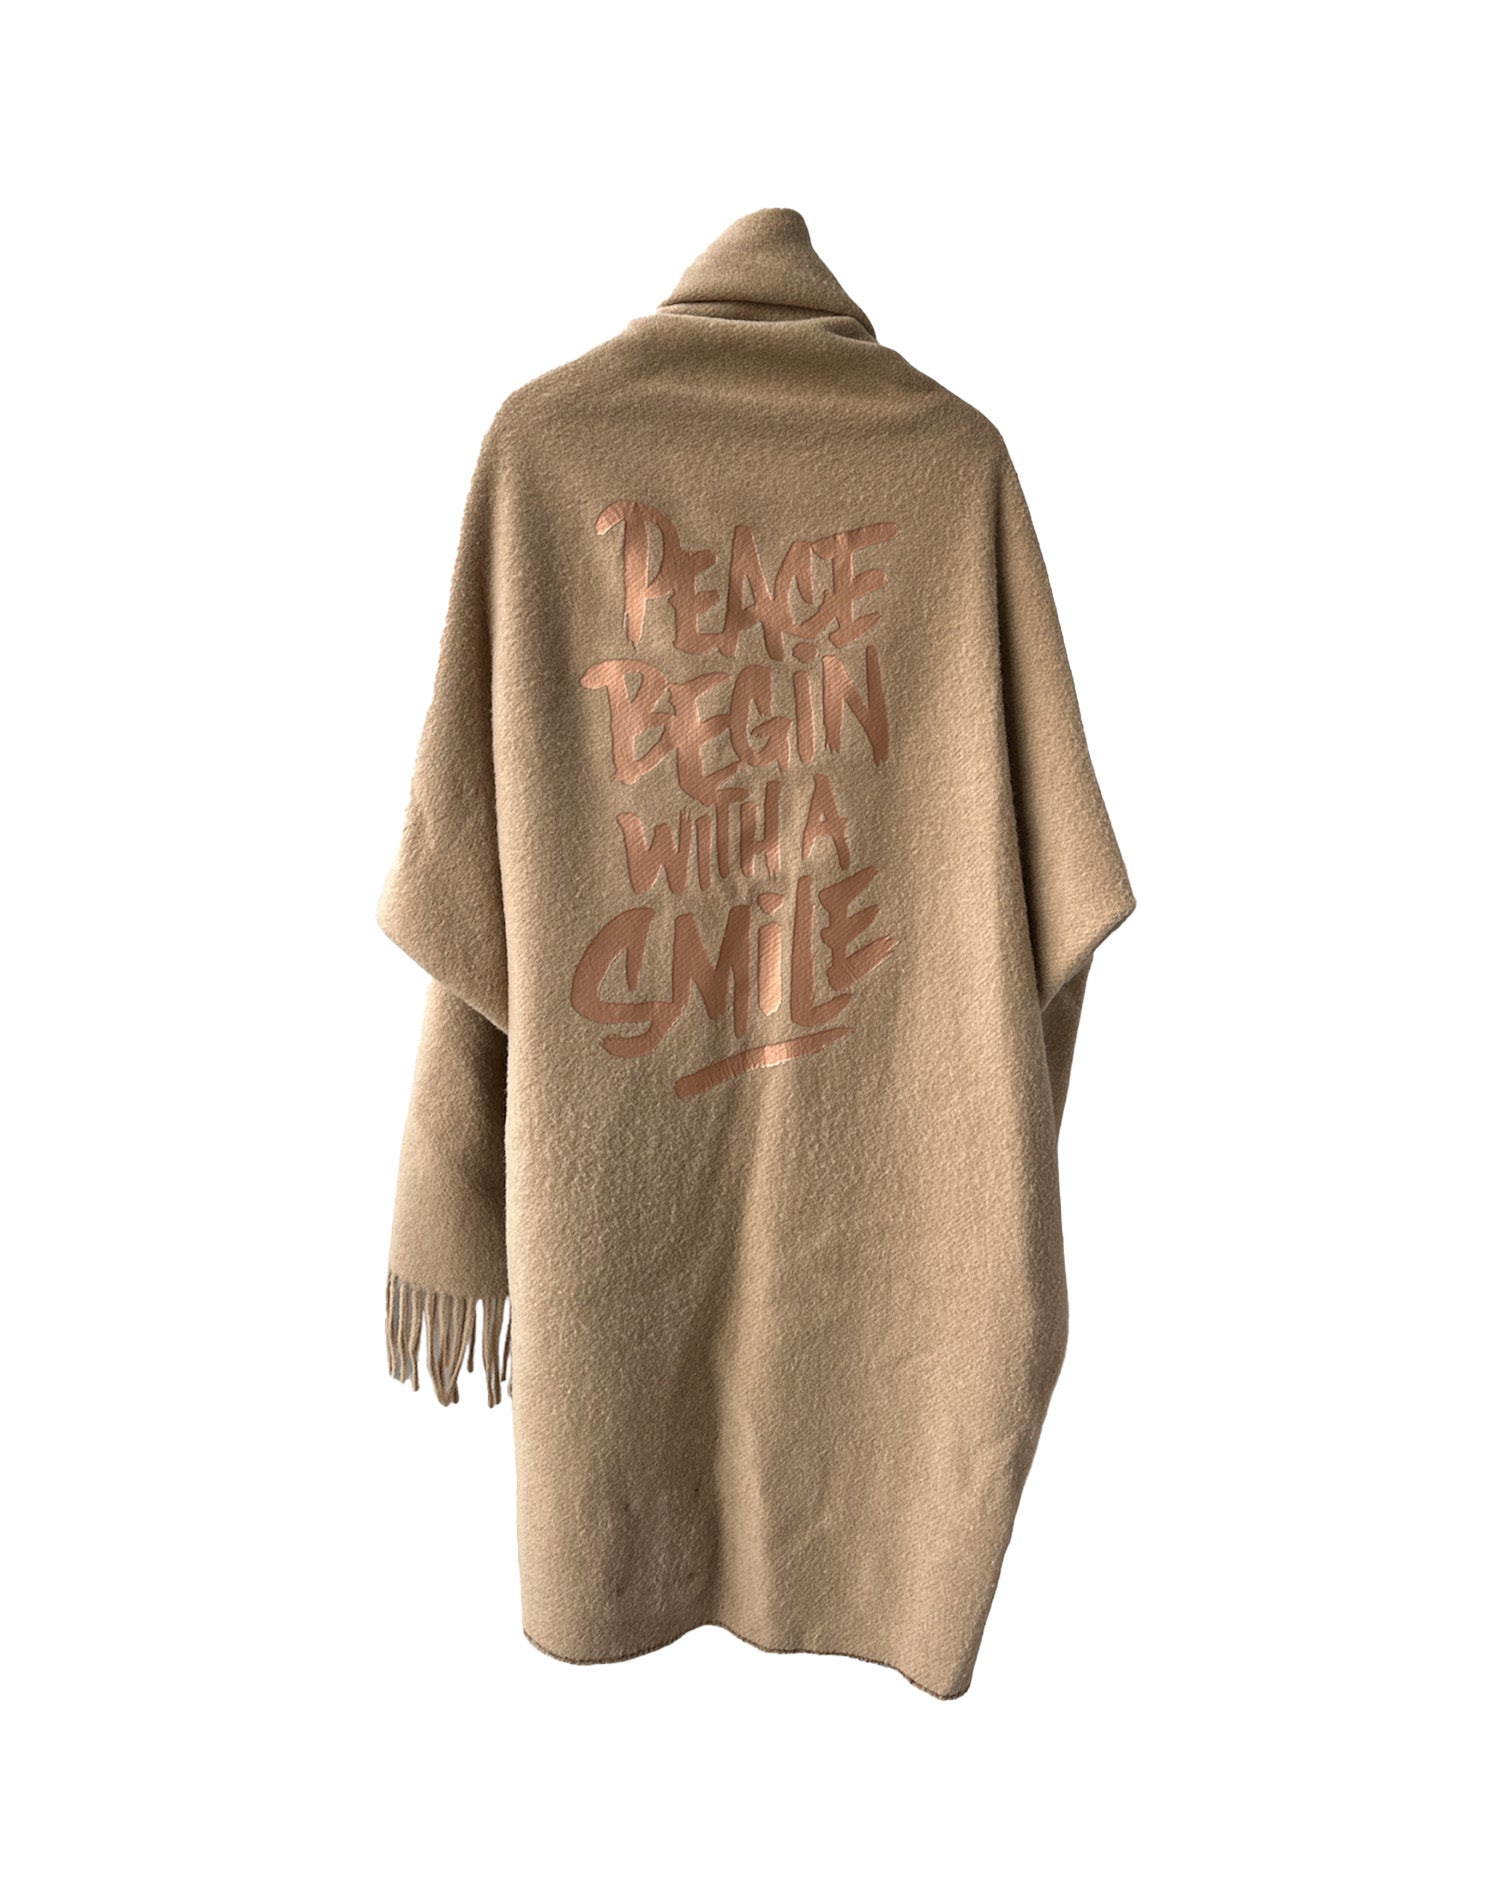 "PEACE BEGIN WITH A SMILE" STATEMENT PONCHO